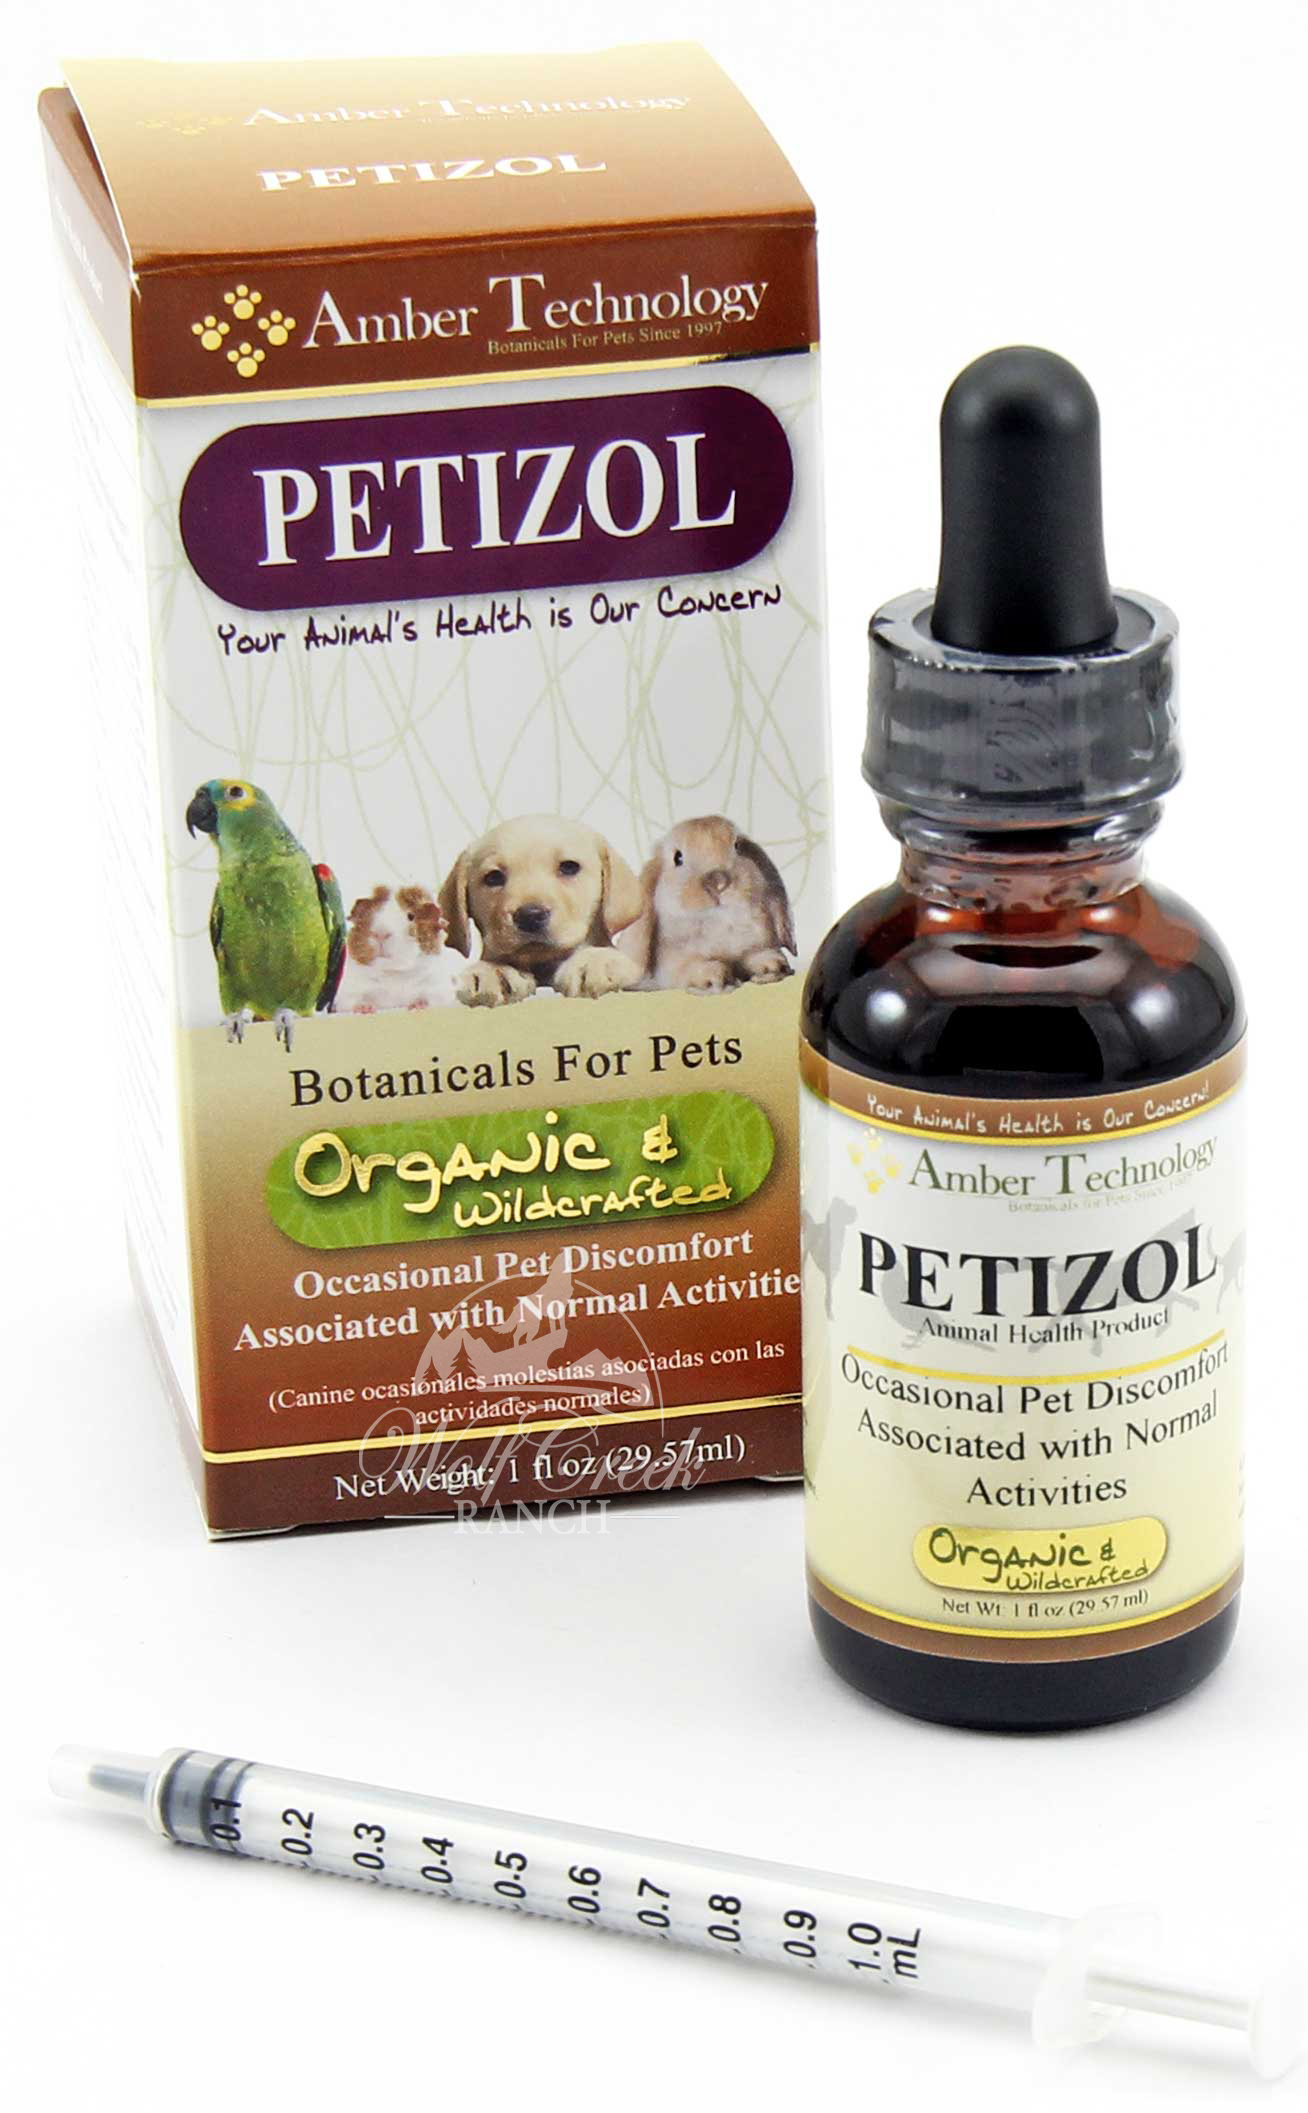 Petizol reduces fever, chest, pains, & inflammation.  Buy Petizol to relieve your pet's pain today!